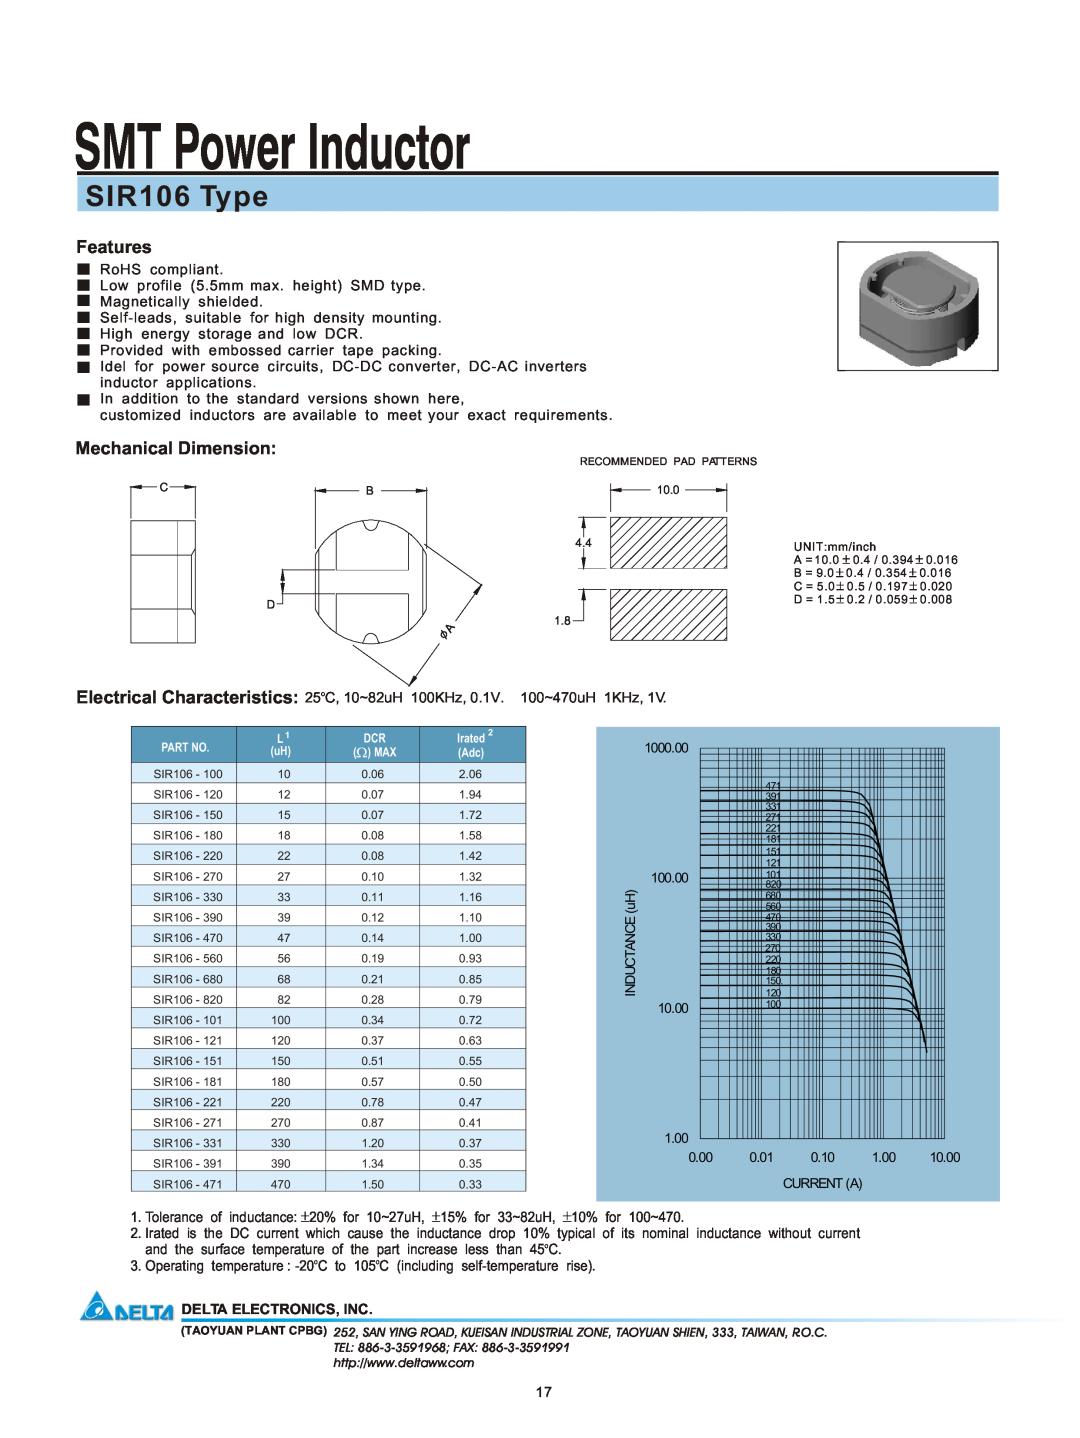 Delta Electronics manual SMT Power Inductor, SIR106 Type, Features, Mechanical Dimension, Delta Electronics, Inc 